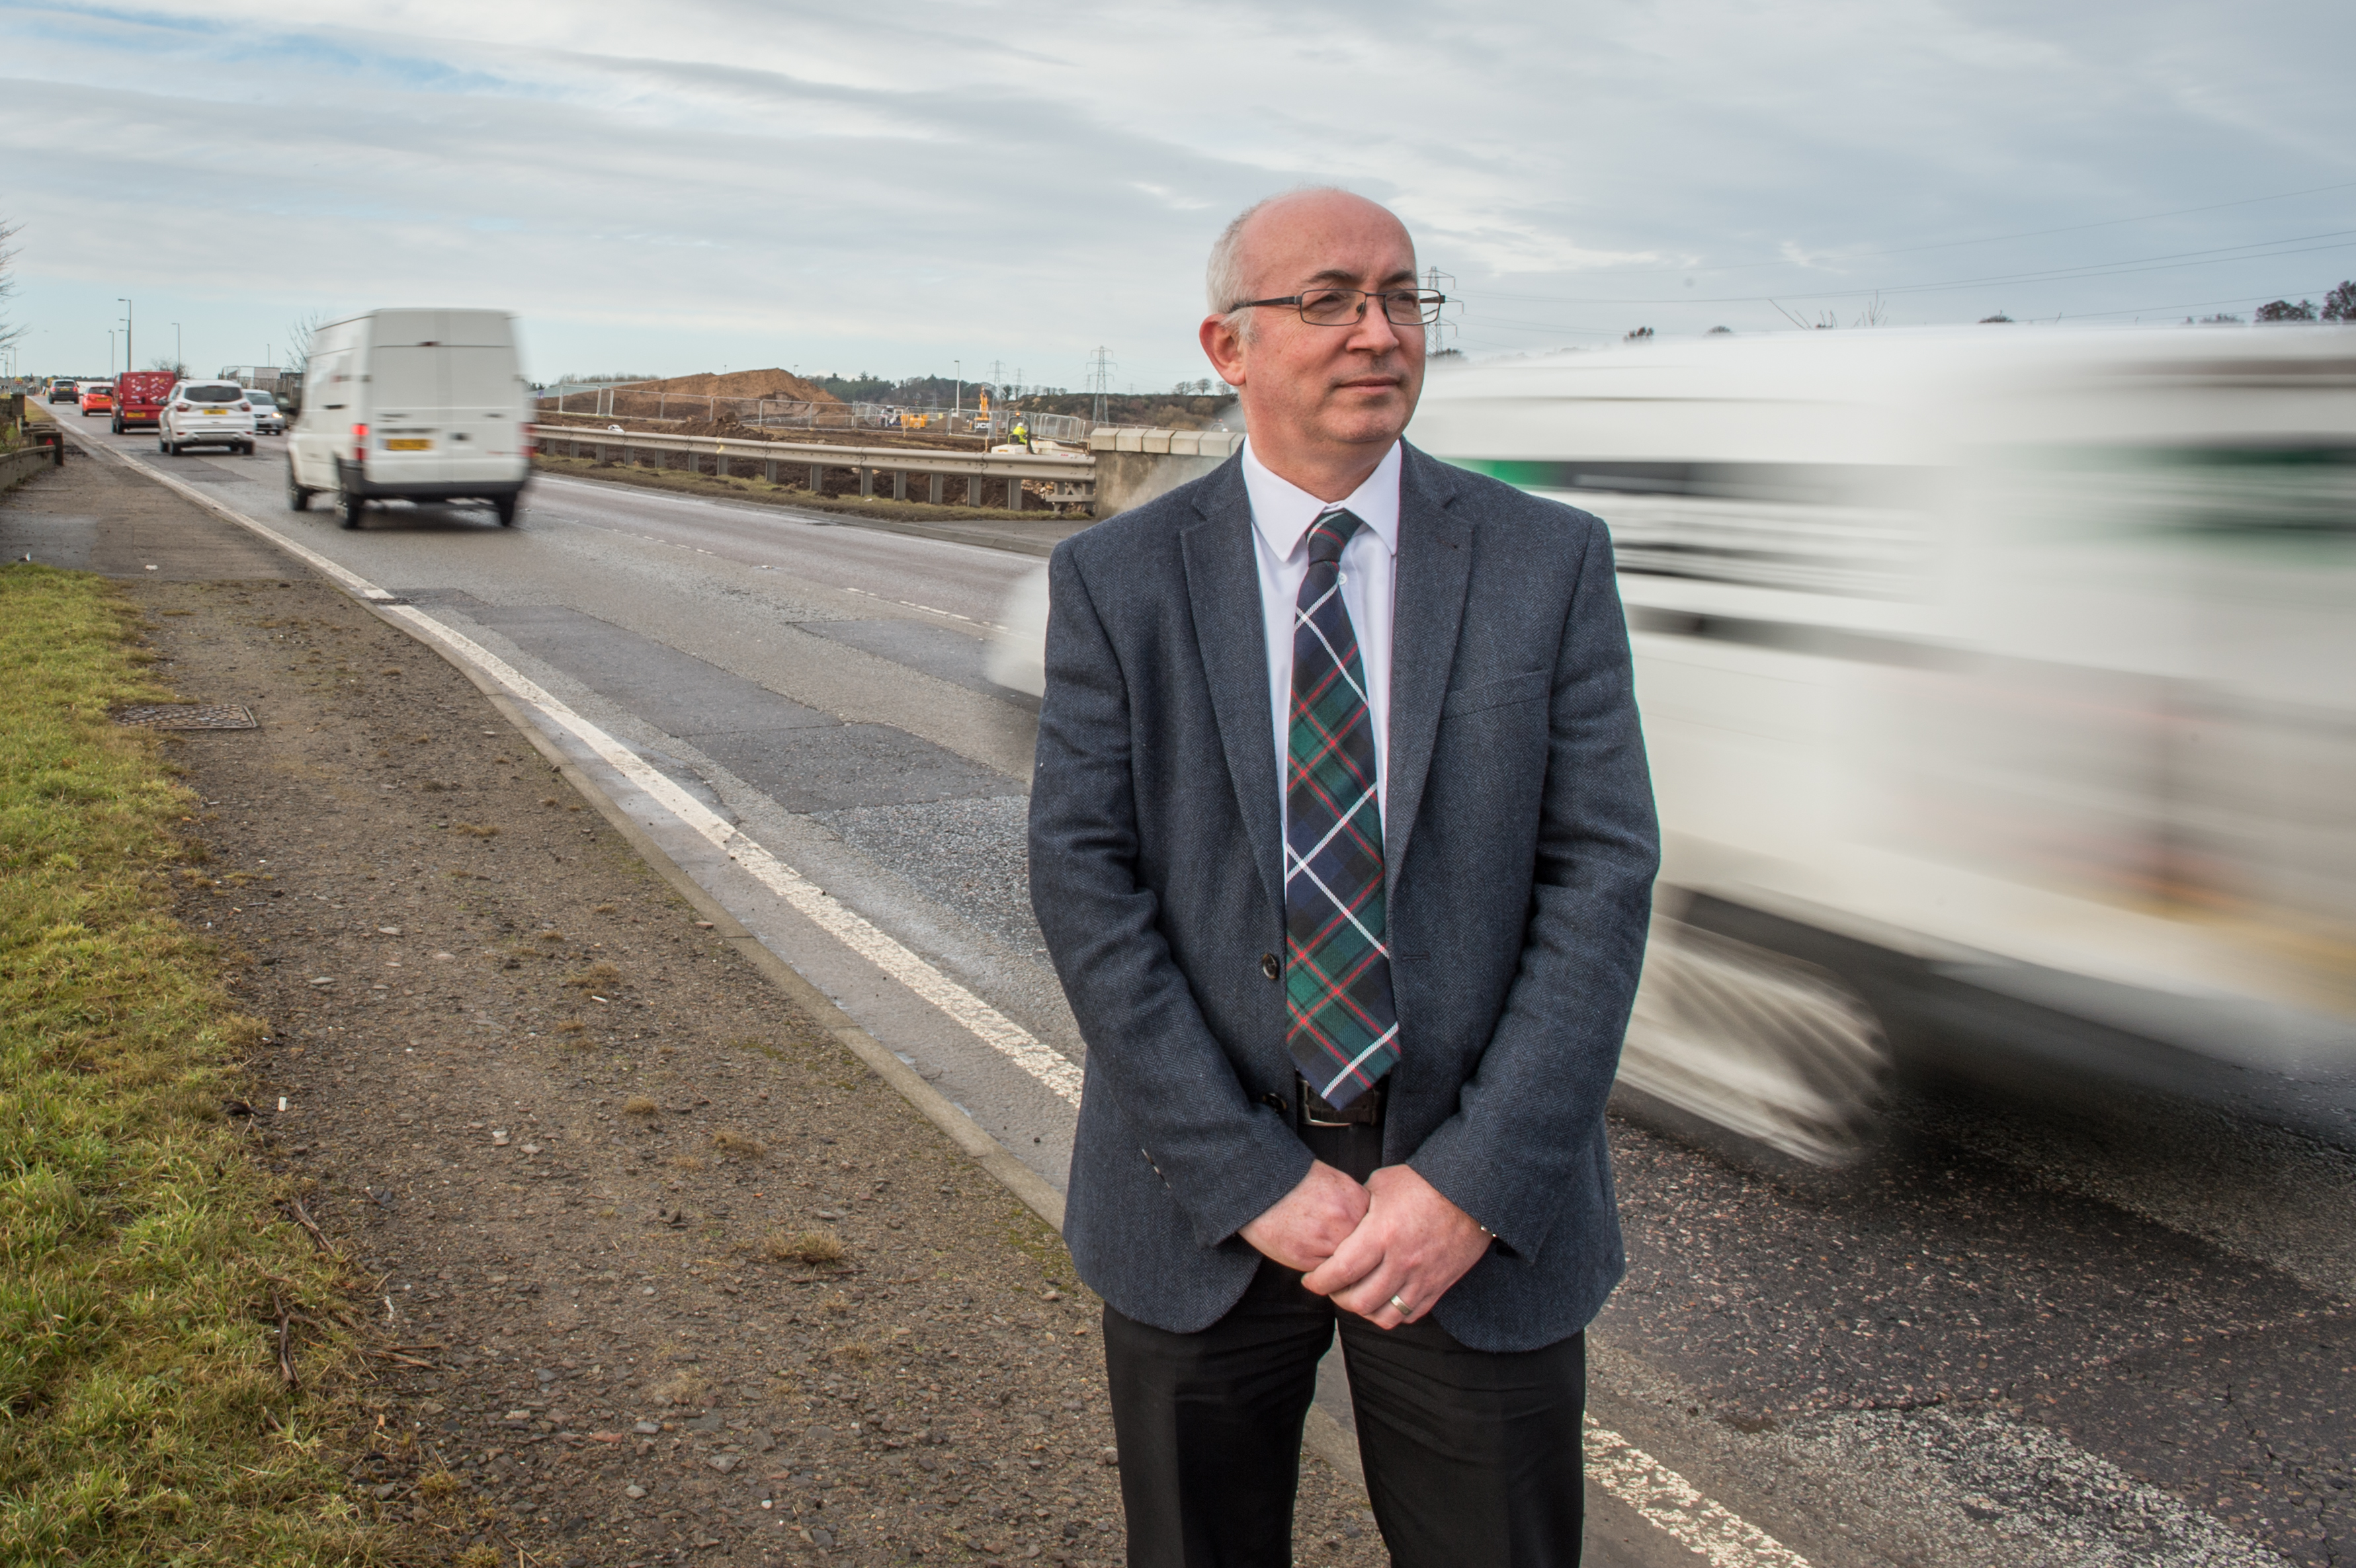 Fochabers Lhanbryde councillor Marc Macrae next to the A96 near Elgin.